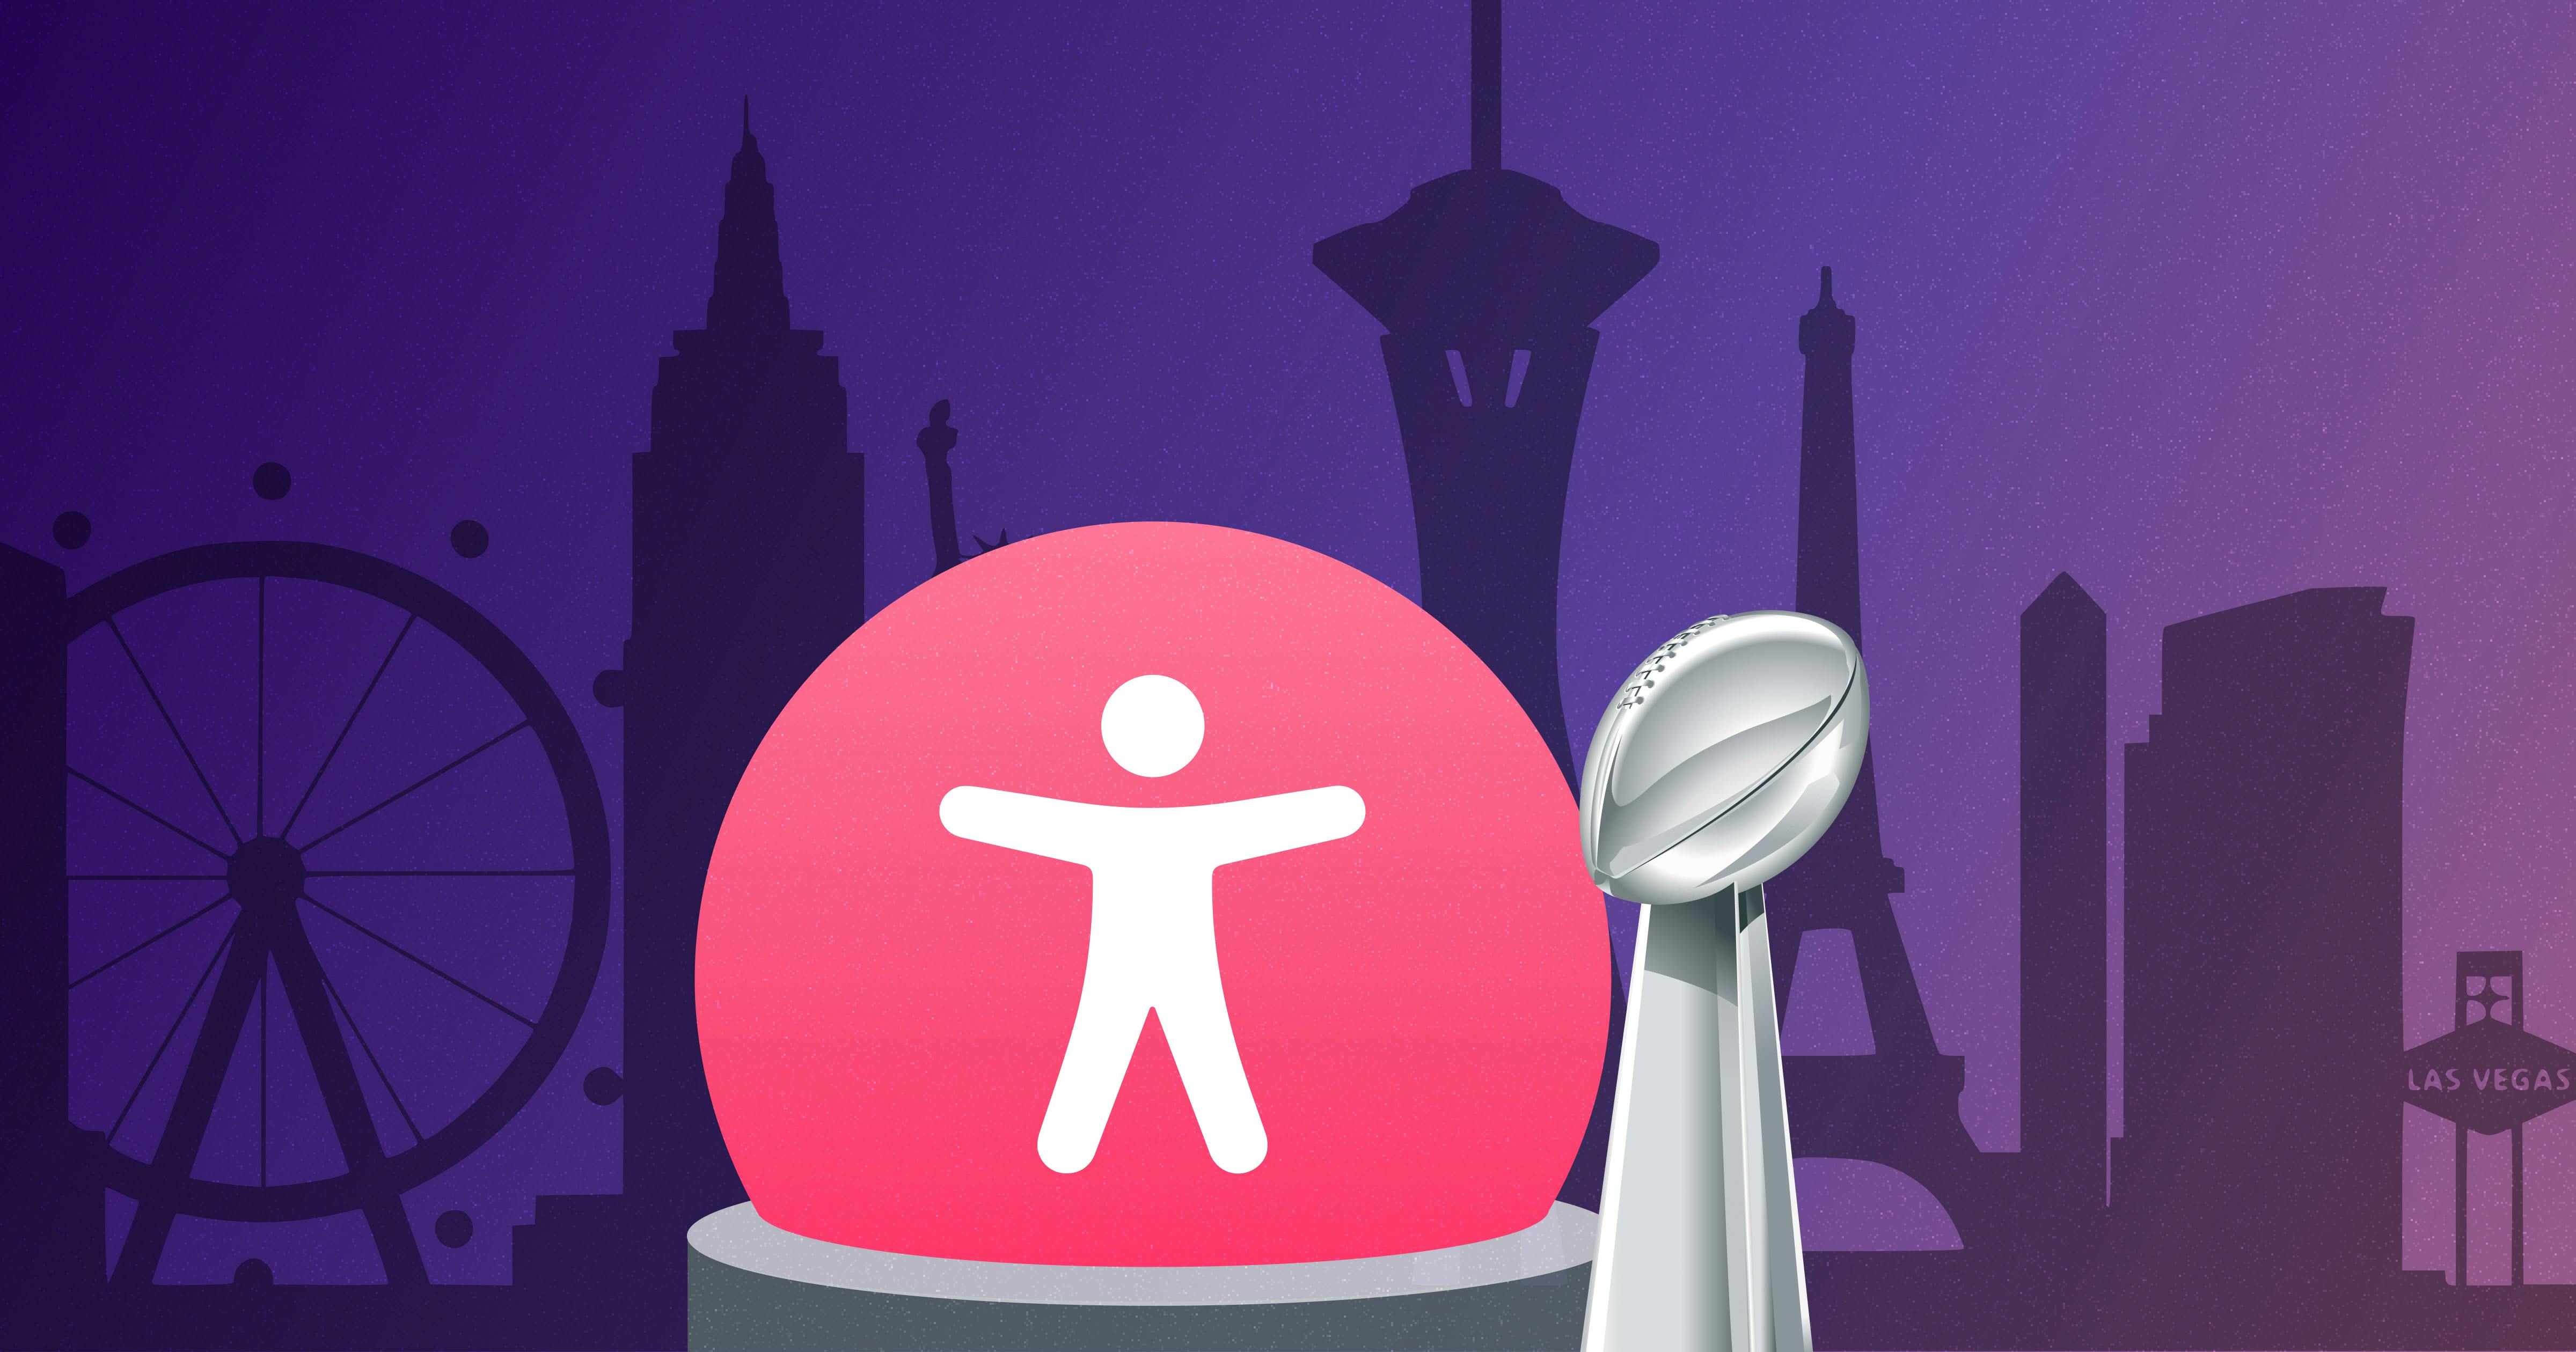 Las Vegas cityscape with accessibility icon in the middle next to football trophy.